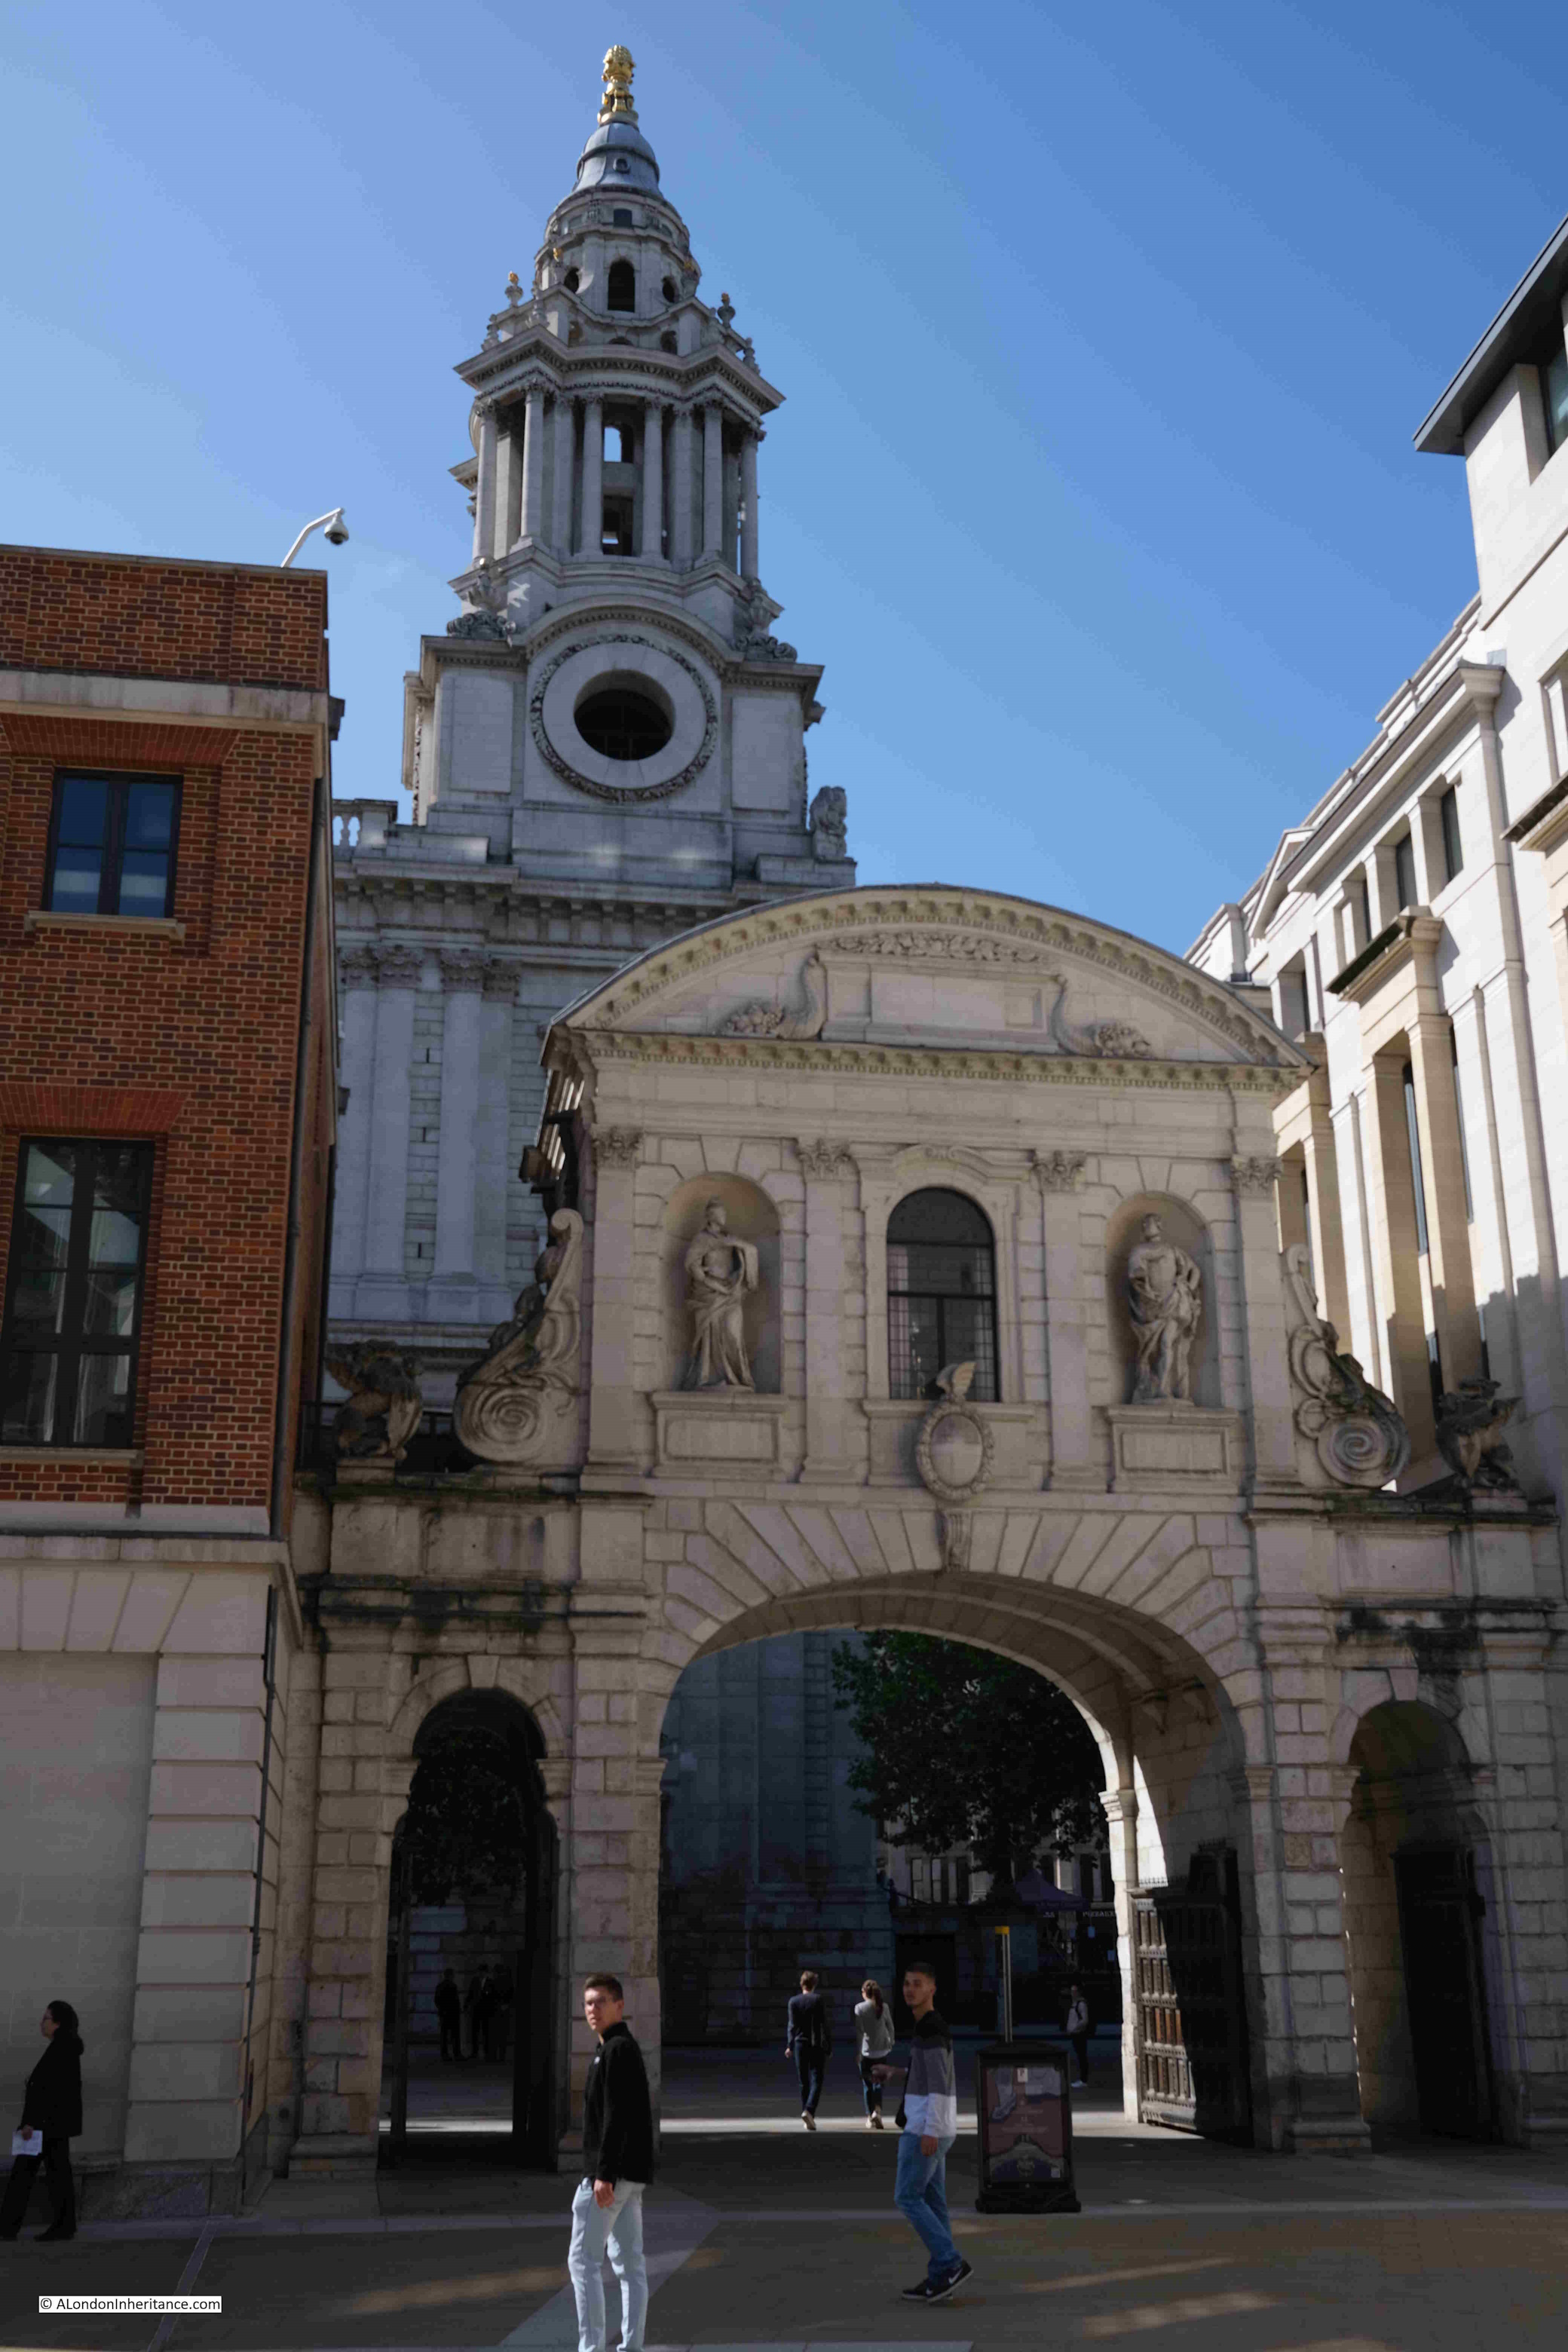 Temple Bar - Between Paternoster Square and St. Pauls Cathedral